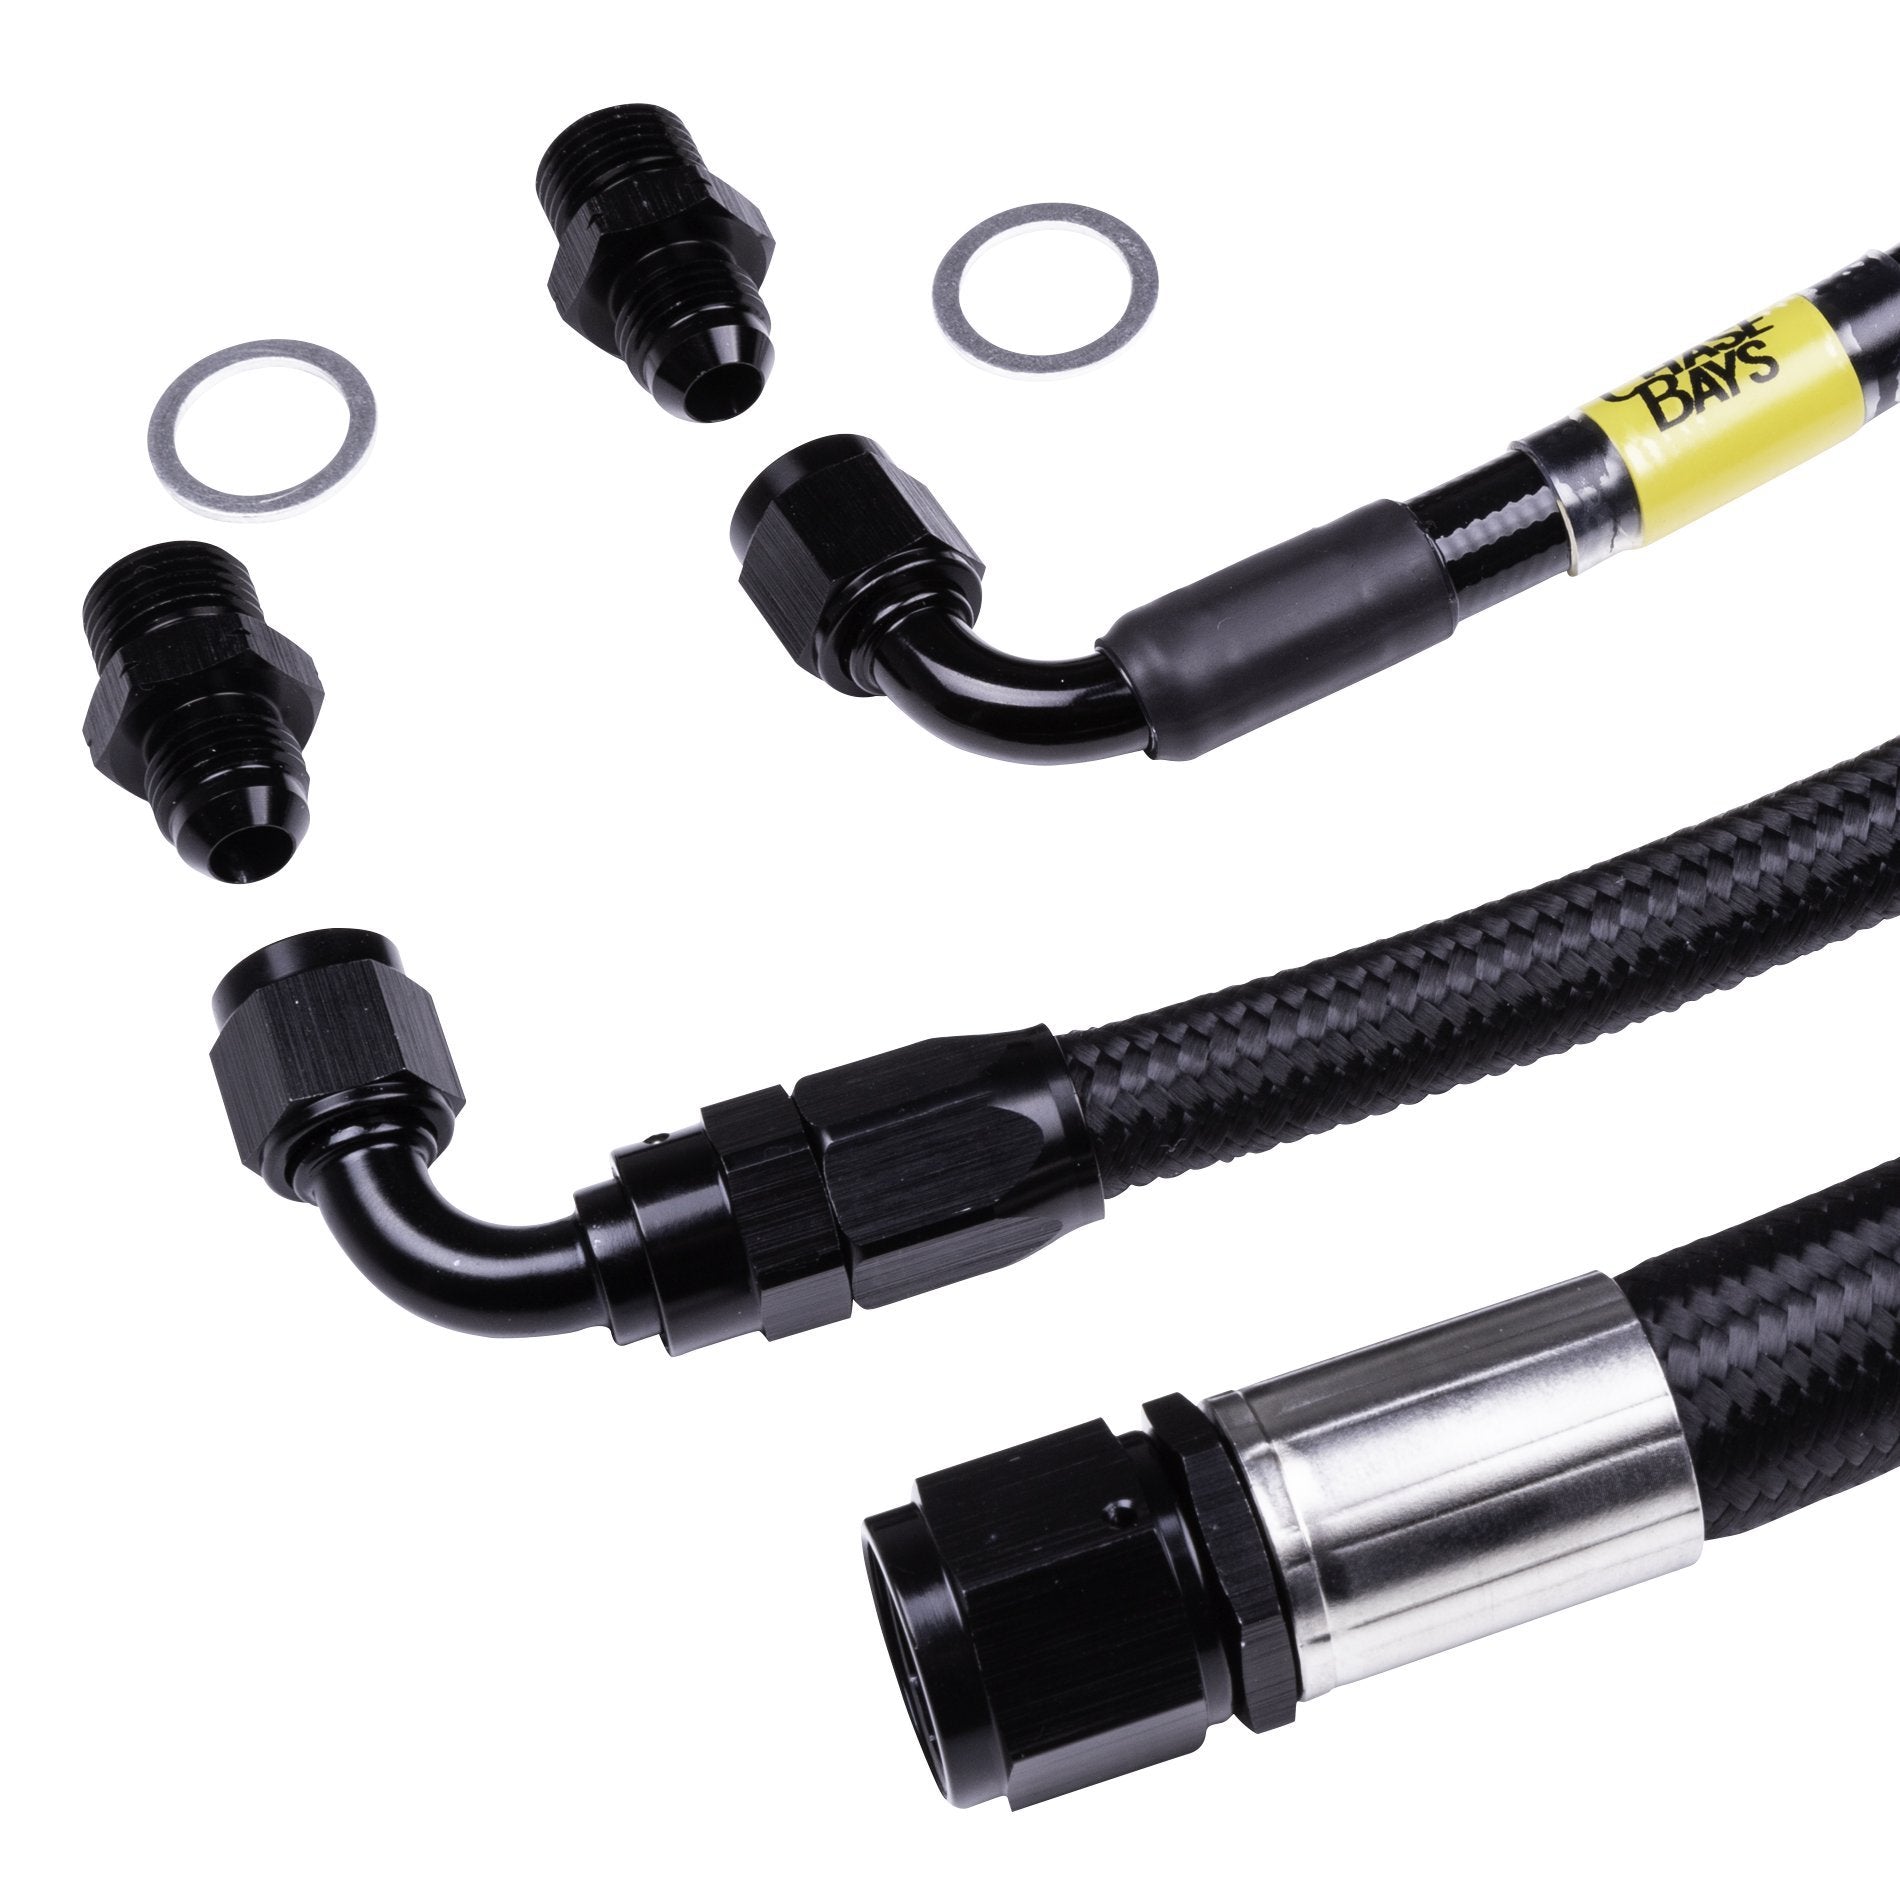 CHASE BAYS BMW E46 Power Steering Kit with BMW Motor